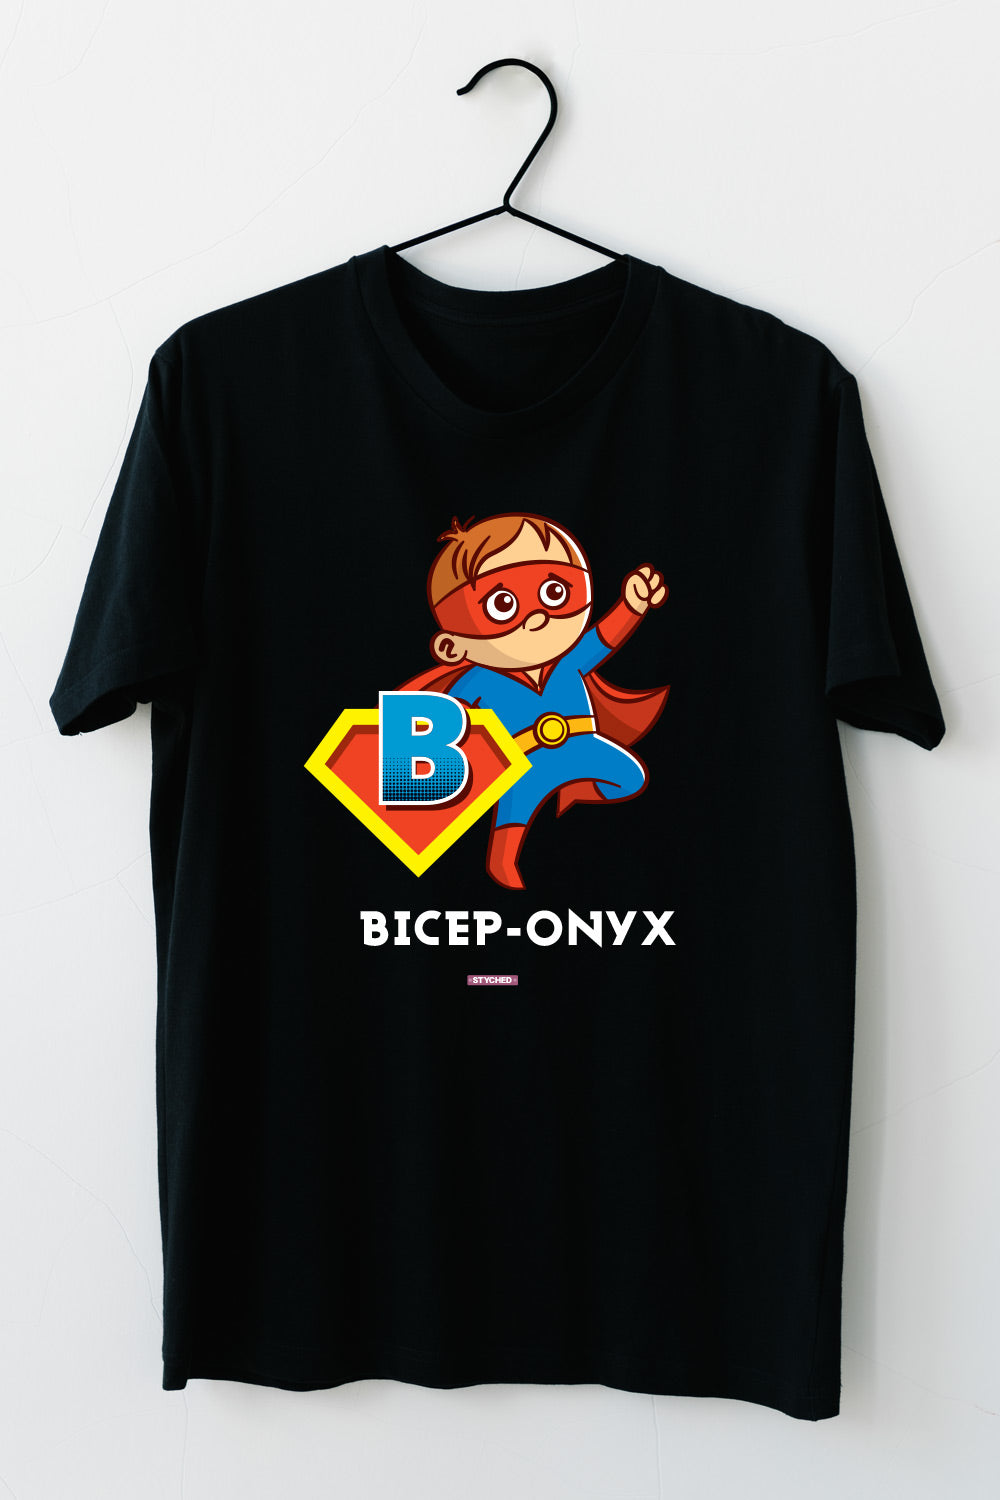 Biceponyx by Styched Black Dry-Fit T-Shirt